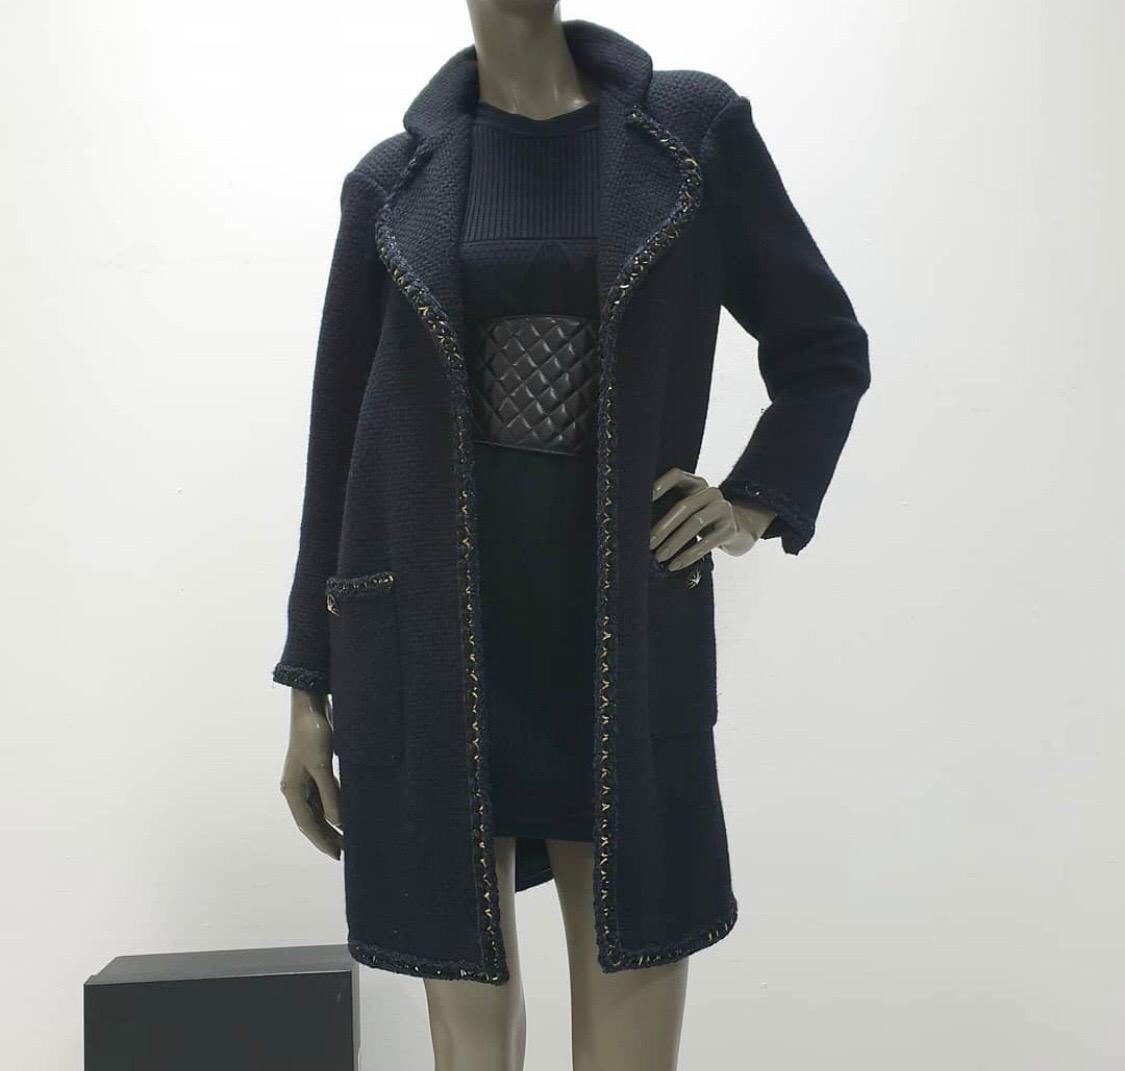 Chanel 15a runway Paris Salzburg collection

Black alpaca coat with navy trim and crystal gripoix buttons.

Retailed for $9990 and sold out

Sz.46

Excellent condition.

For buyers from EU we can provide shipping from Poland. Please demand if you